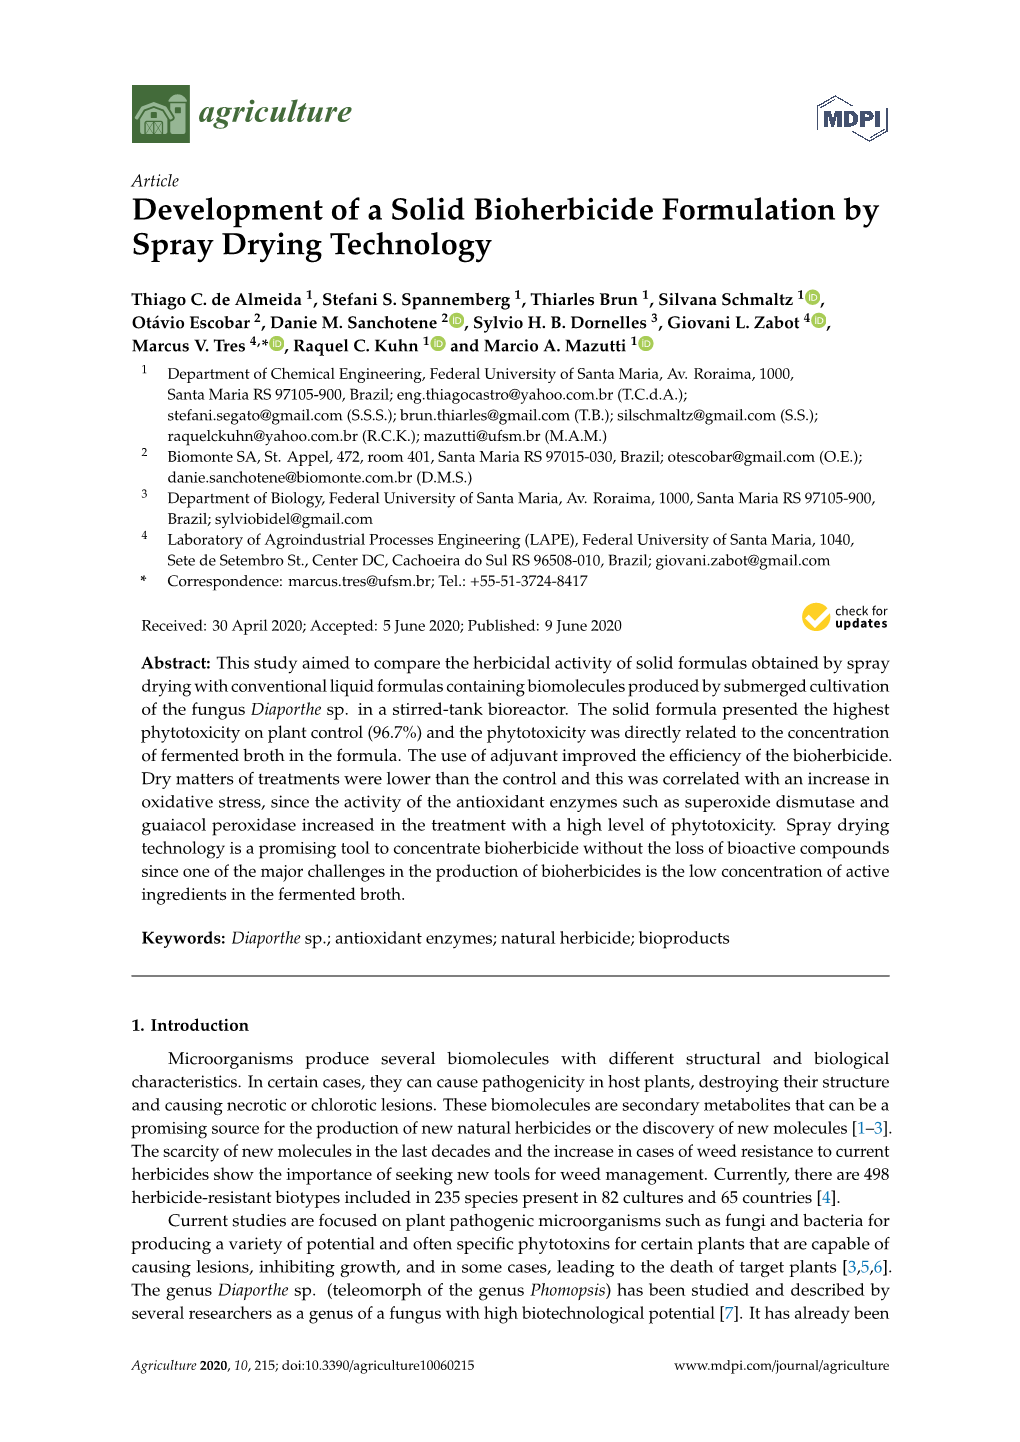 Development of a Solid Bioherbicide Formulation by Spray Drying Technology